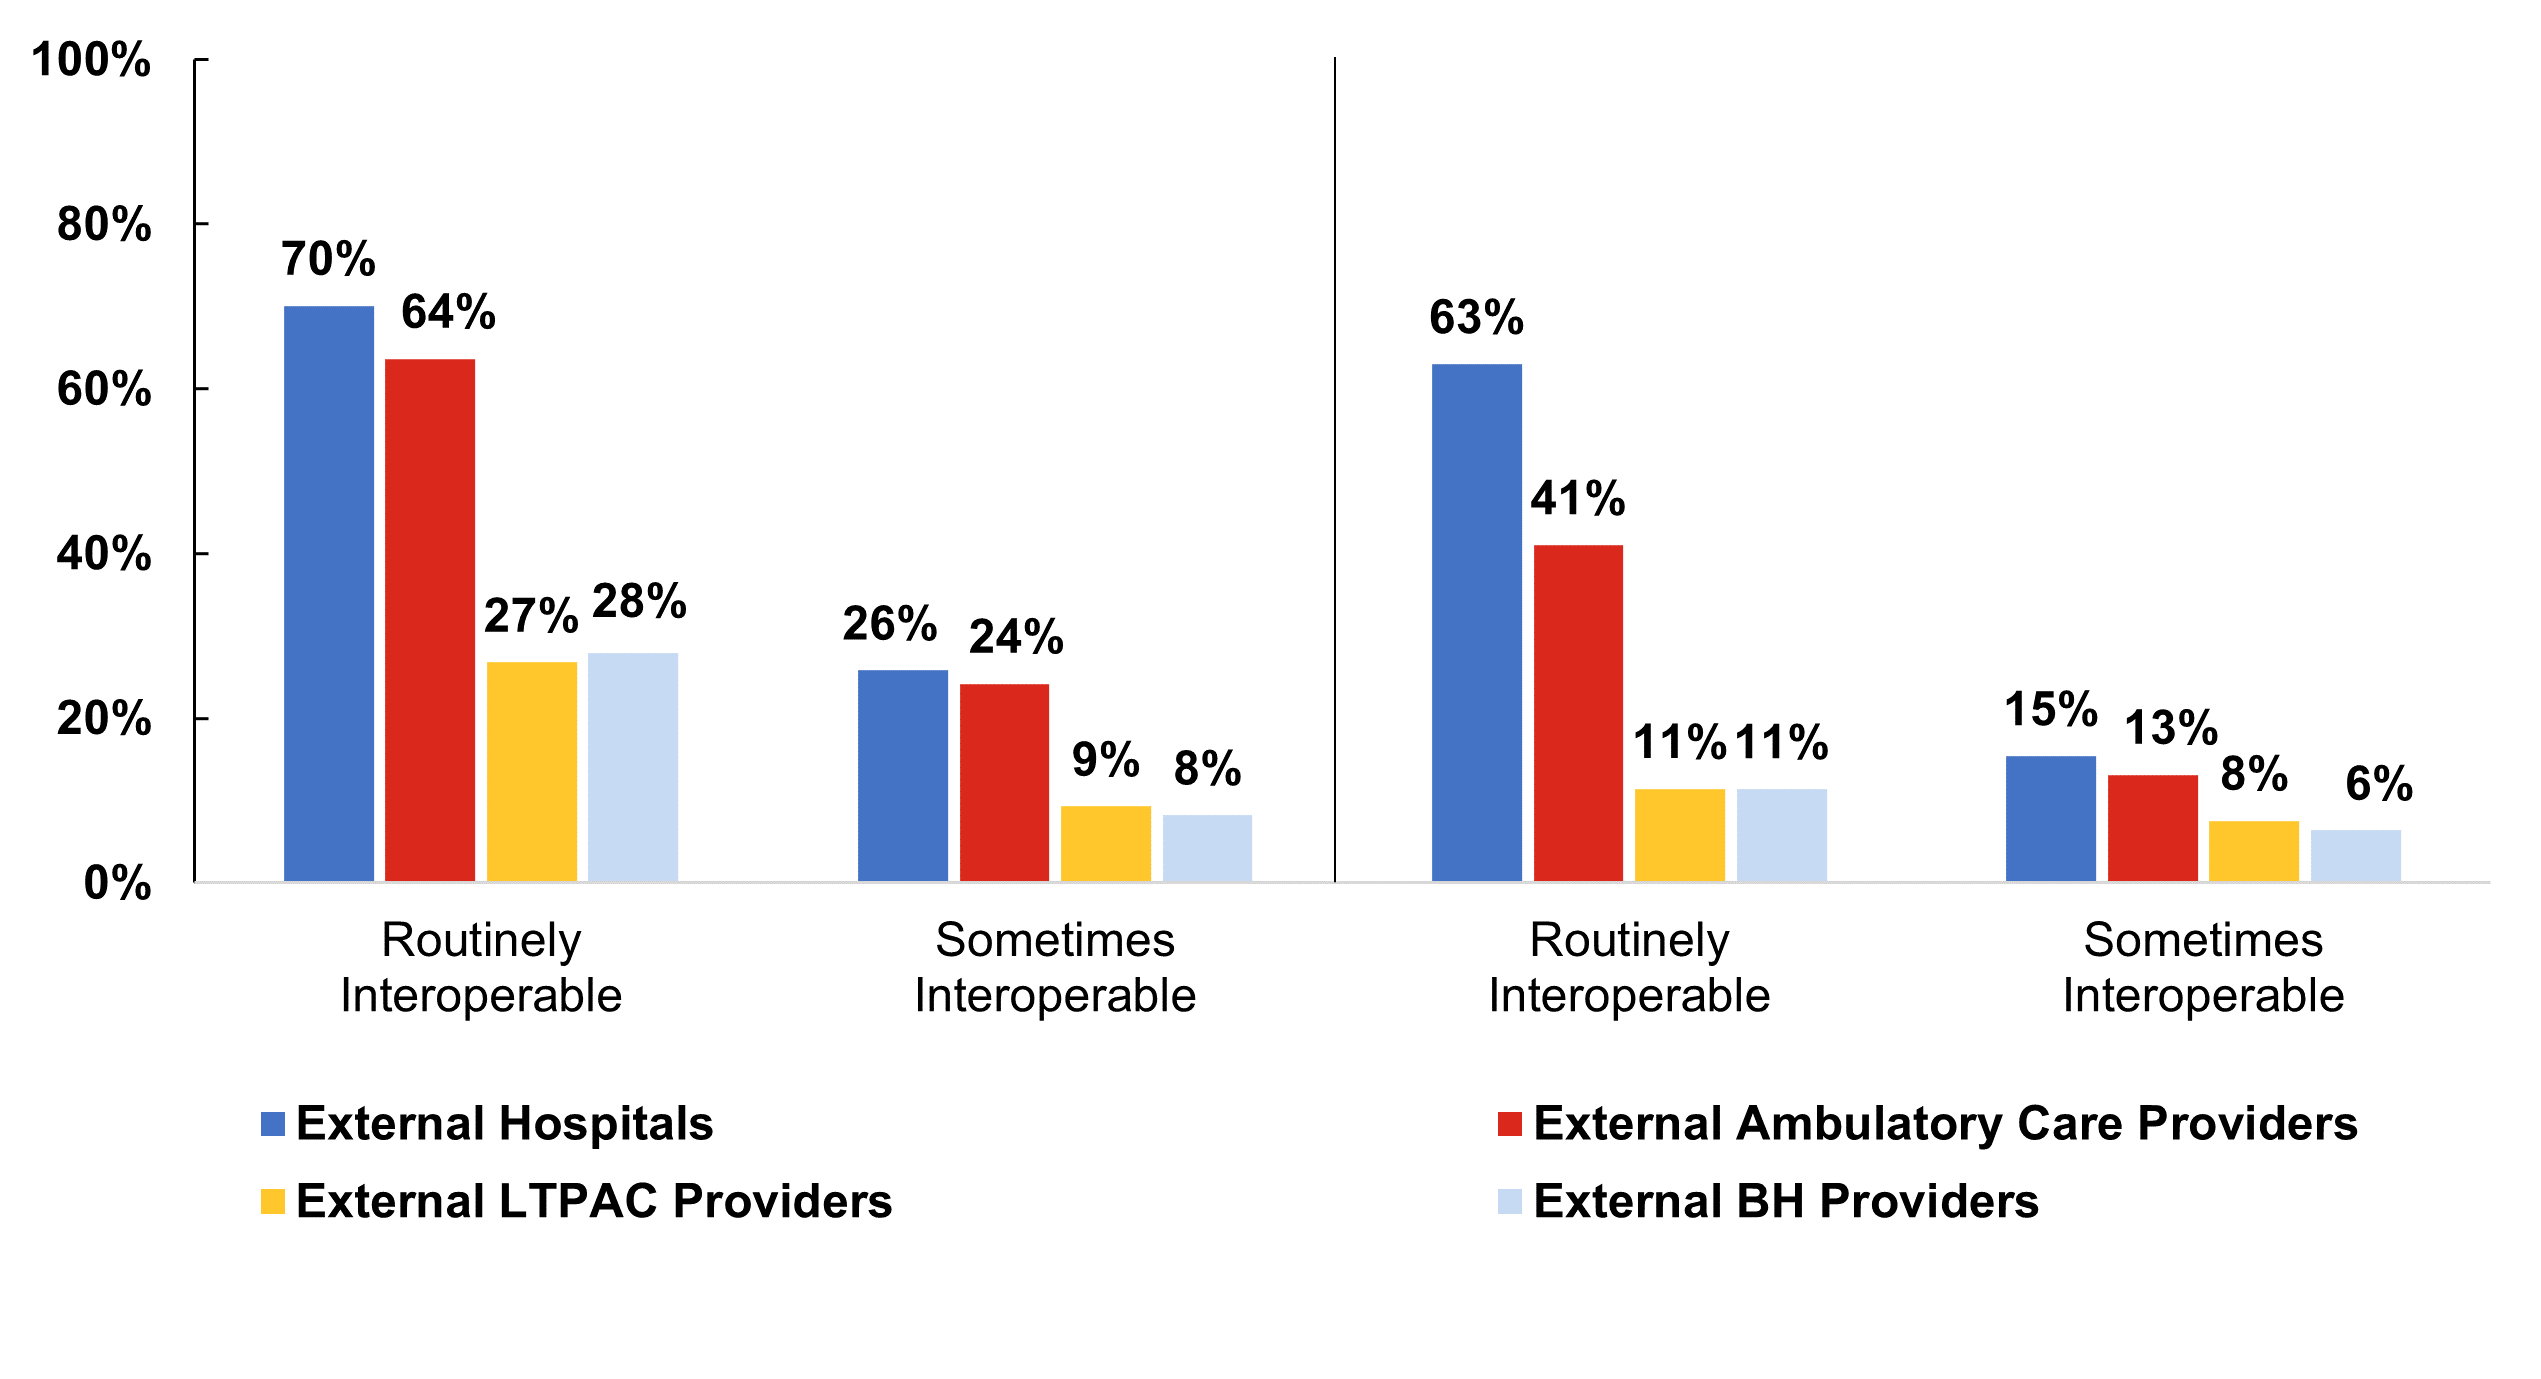 This figure shows a detailed bar chart illustrating the engagement levels of non-federal acute care hospitals in sharing electronic summary of care records with most or all external providers in 2023. The chart has four main bars, each representing a different provider type: hospitals, ambulatory care, LTPAC, and behavioral health. Each bar is further divided to show the percentage of hospitals engaging in sending and receiving activities. For external hospitals, 70% send and 63% receive; for ambulatory care providers, 63% send and 41% receive; for LTPAC providers, 26% send and 11% receive; for behavioral health providers, 27% send and 11% receive. This visualization highlights the varying degrees of interoperability engagement across different health care sectors, with notably lower interaction with LTPAC and behavioral health providers.